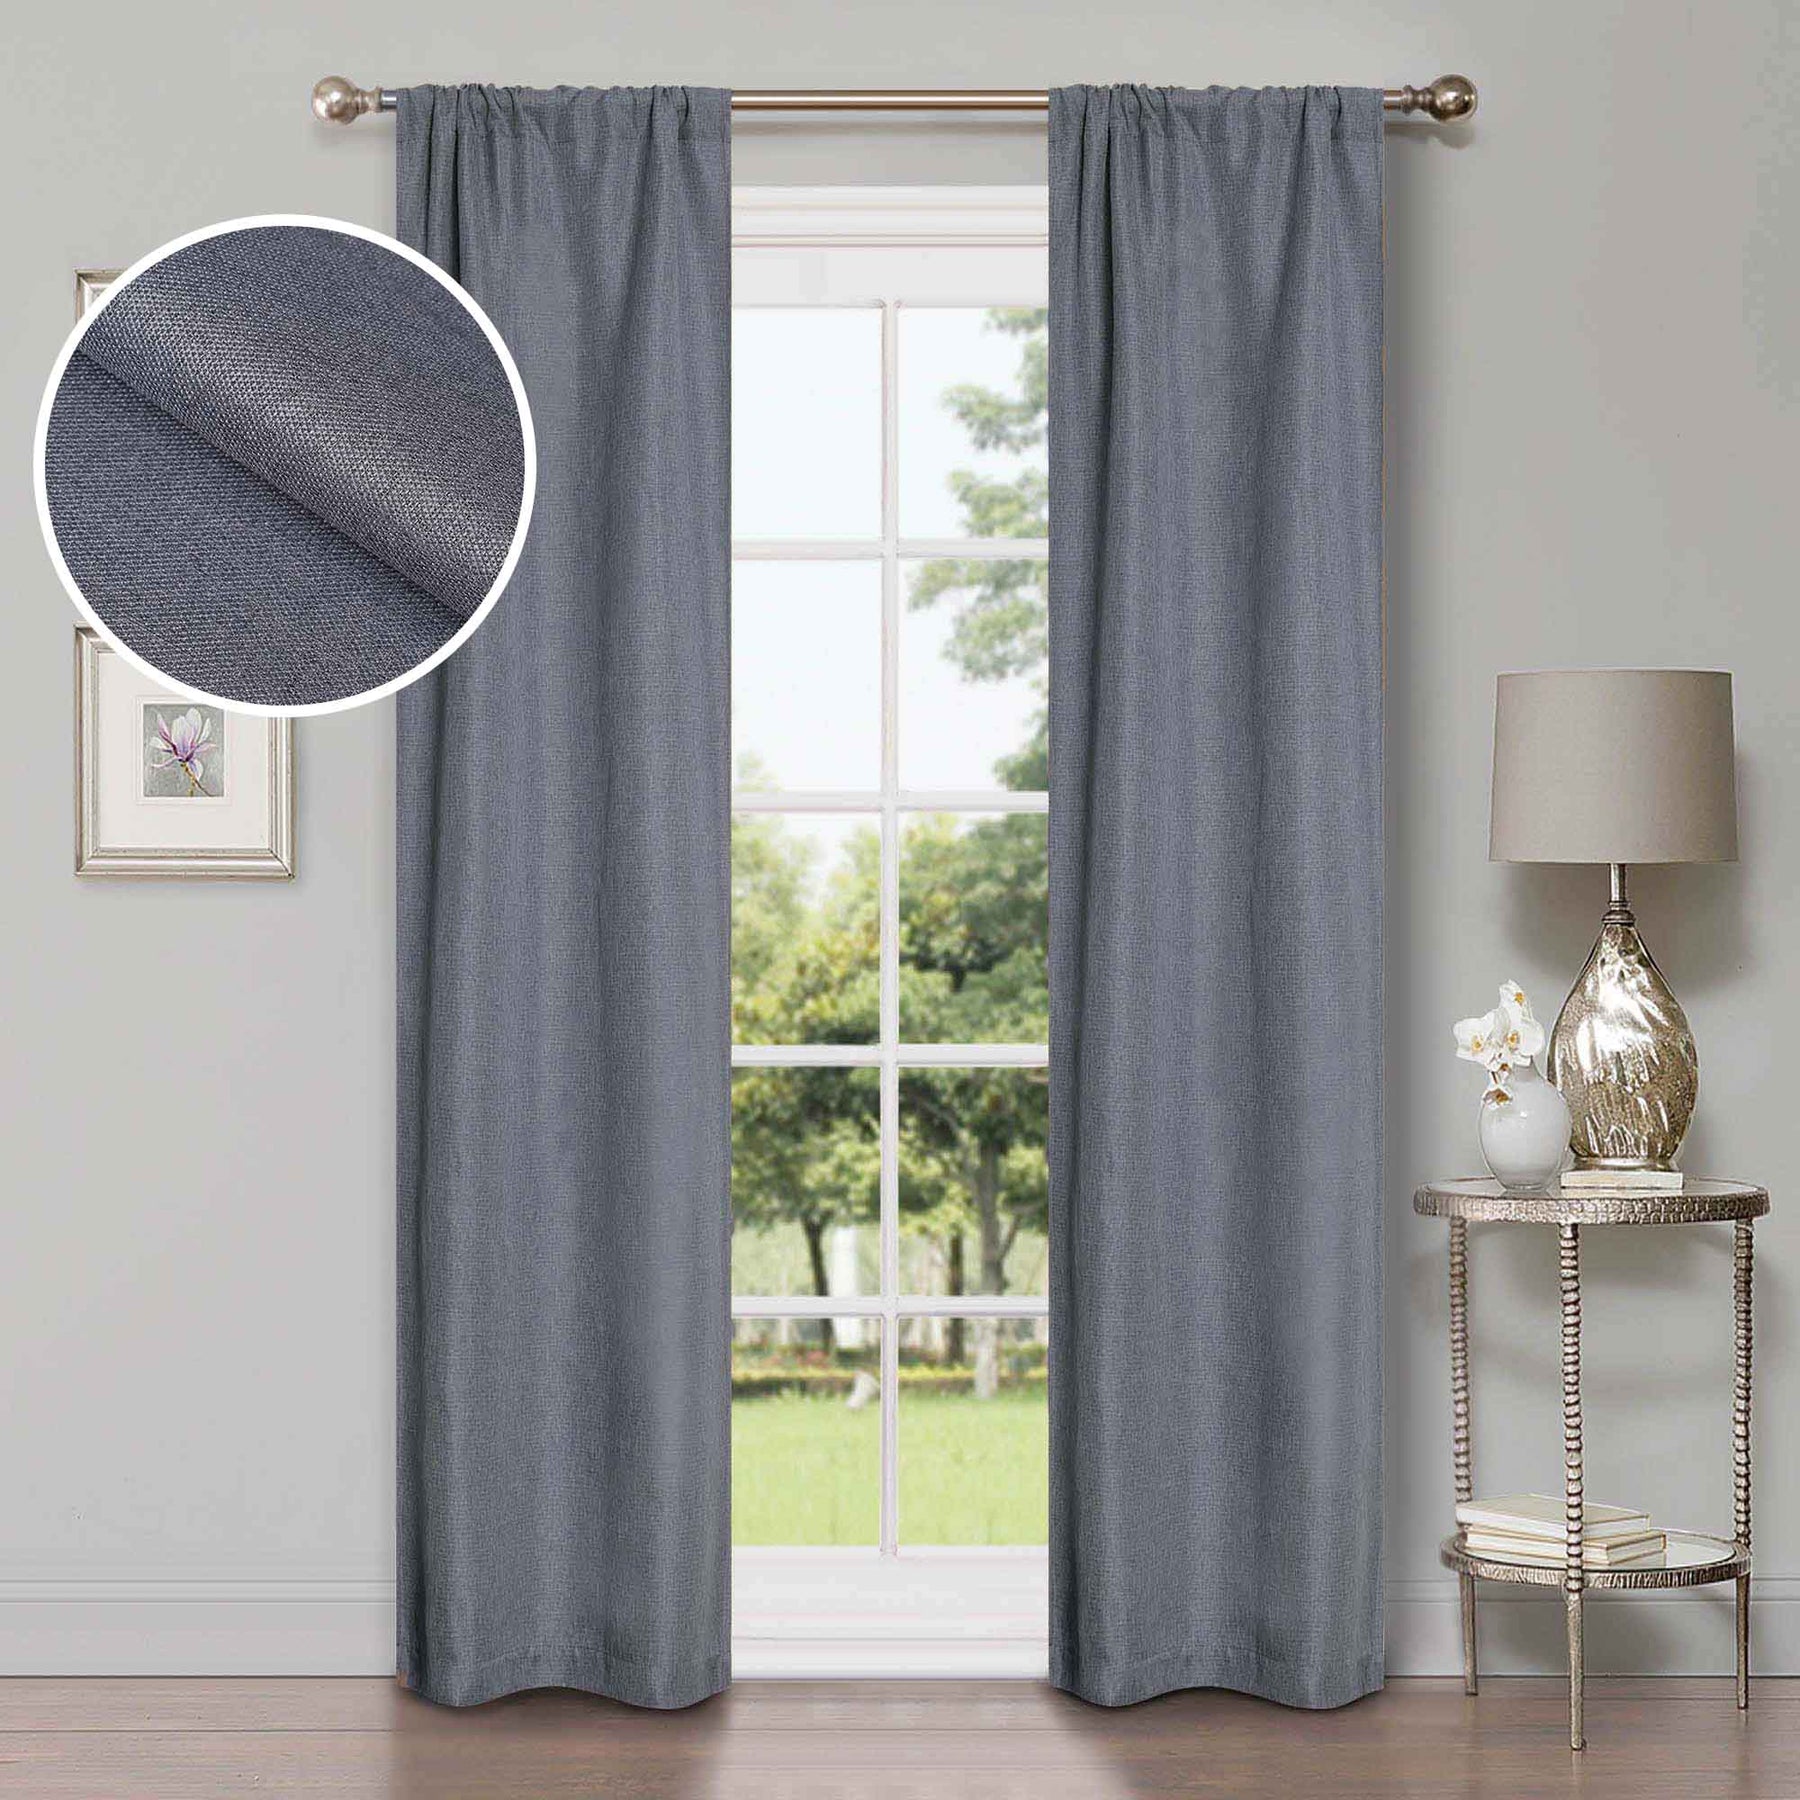 Linen Pattern Washable Room Darkening Blackout Curtains, Set of 2 - Charcoal